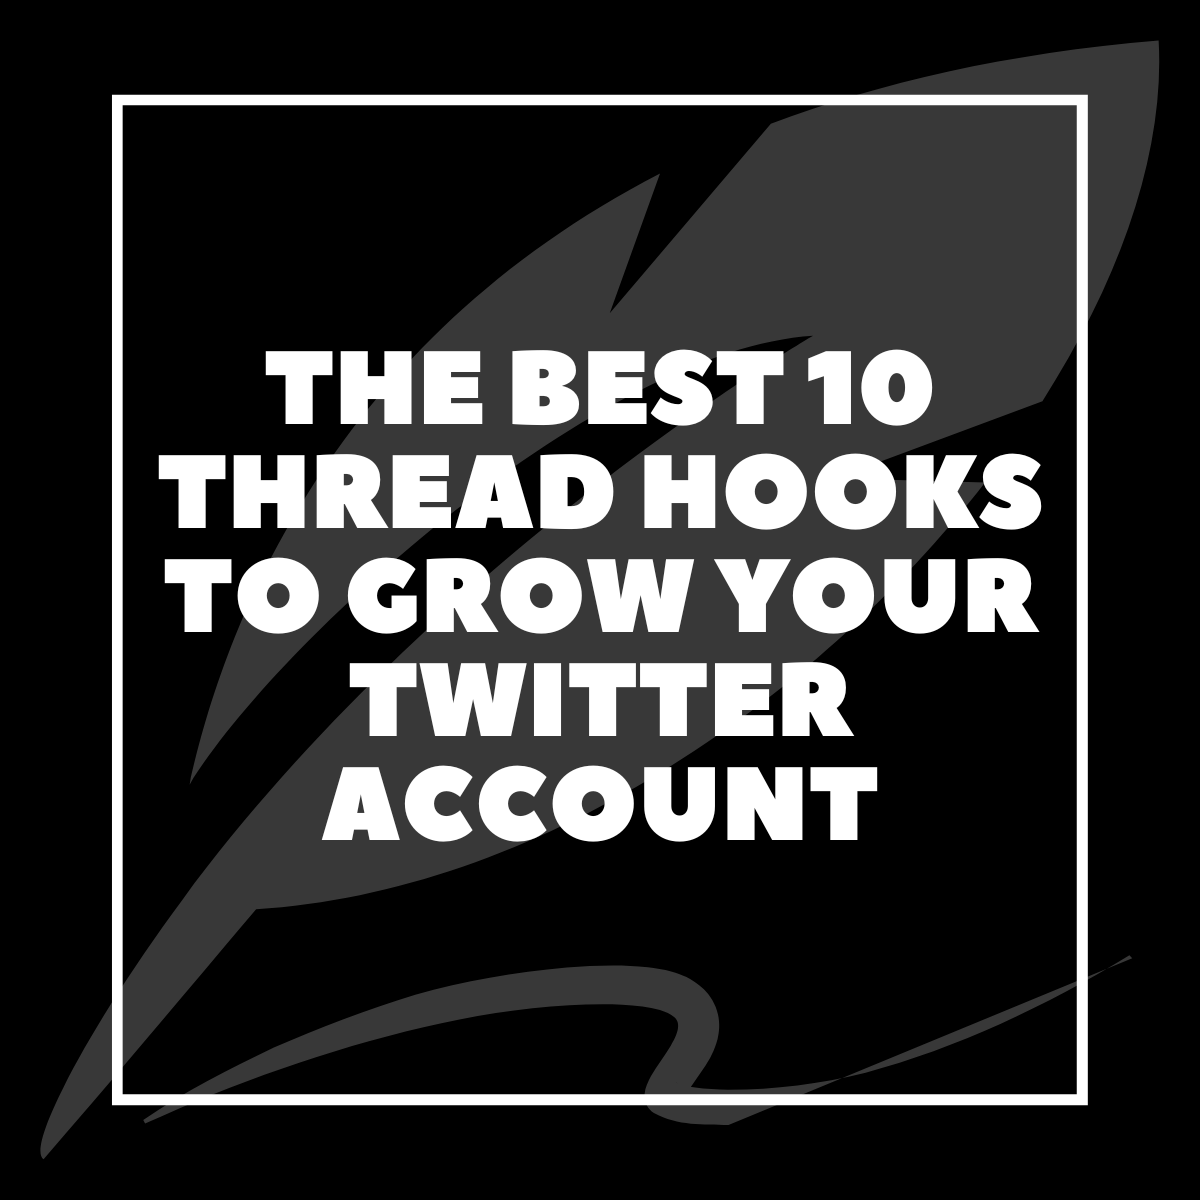 The Best 10 Thread Hooks to Grow your Twitter Account, by Sharyph, Passion & Profit